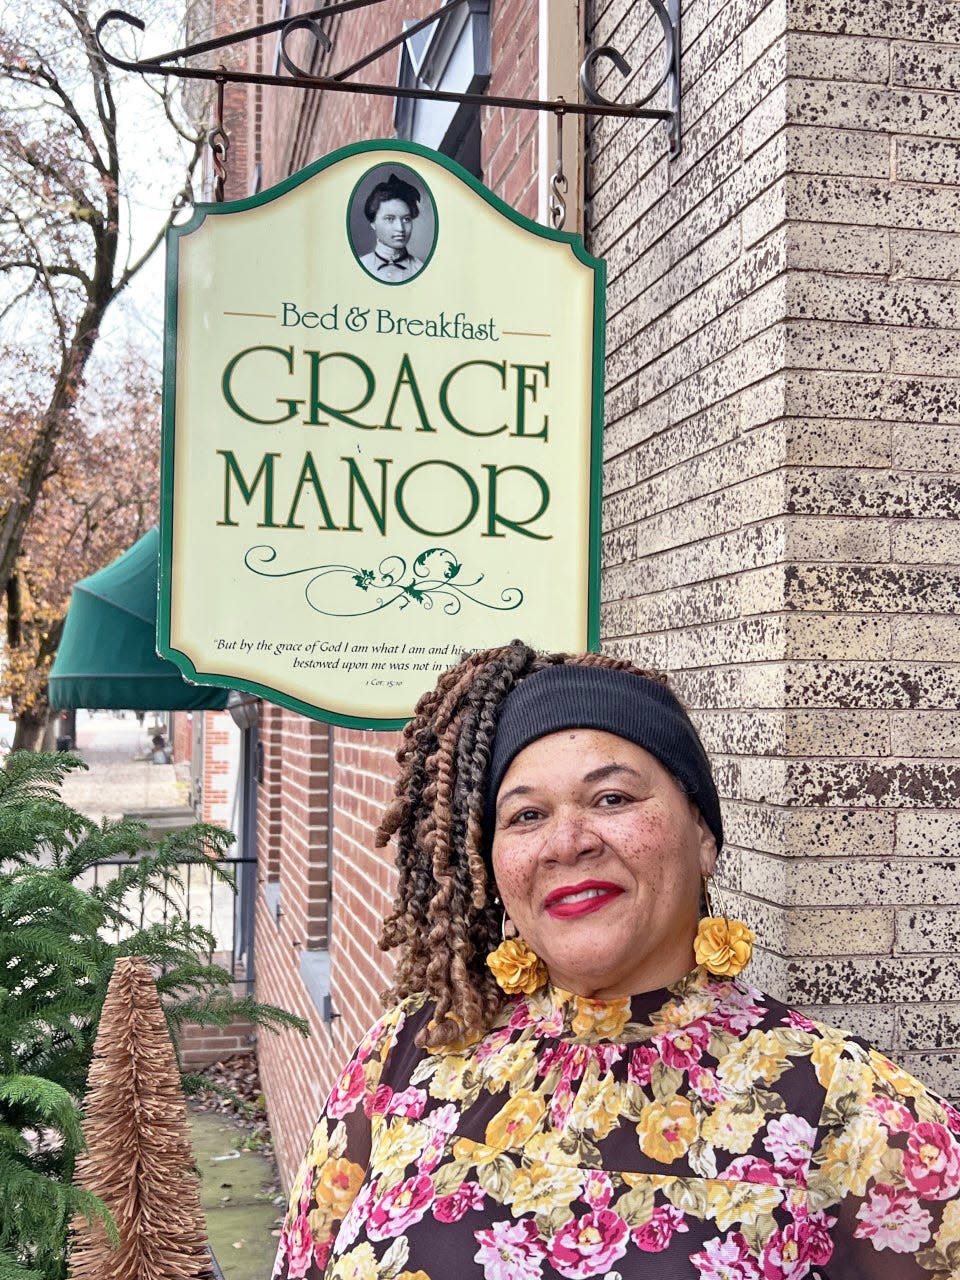 York’s Joanne Wilmore stands in front of her West Market Street bed-and-breakfast, Grace Manor. “Grace” comes from Wilmore’s grandmother, and the image shows Wilmore’s great-grandmother Ethel. “These matriarchs spent their lives working for others with little to no intentionally built space for their own rest, refuge and enjoyment,” Wilmore wrote on Sojourn Noir’s website.